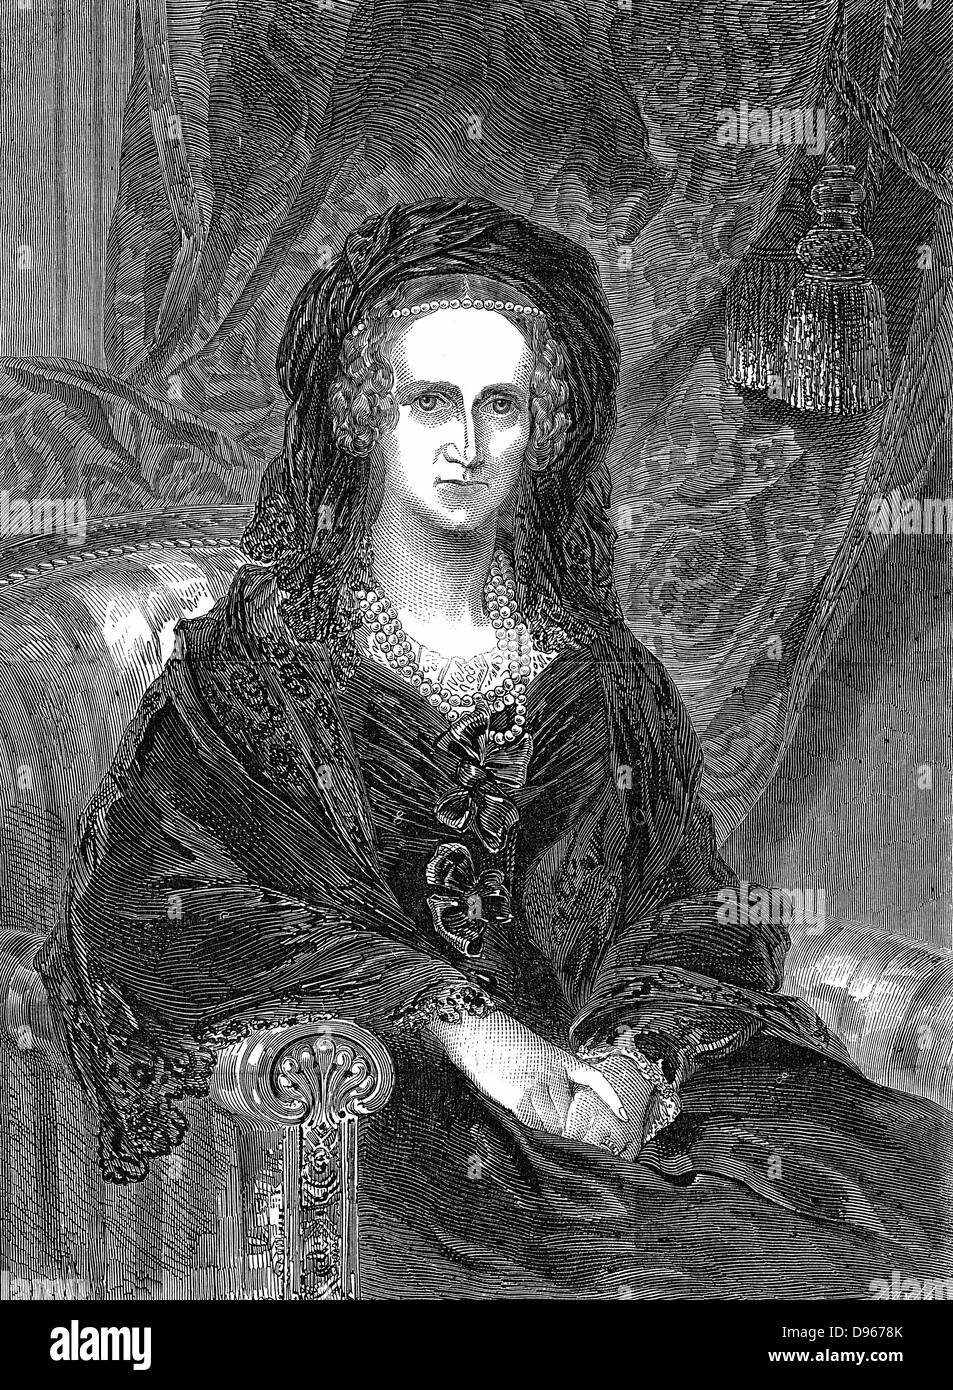 Adelaide of Saxe-Coburg Meiningen (1792-1849) German-born Queen-consort of William IV of Great Britain (1830-37). Engraving of Adelaide as a widow published 1849 Stock Photo